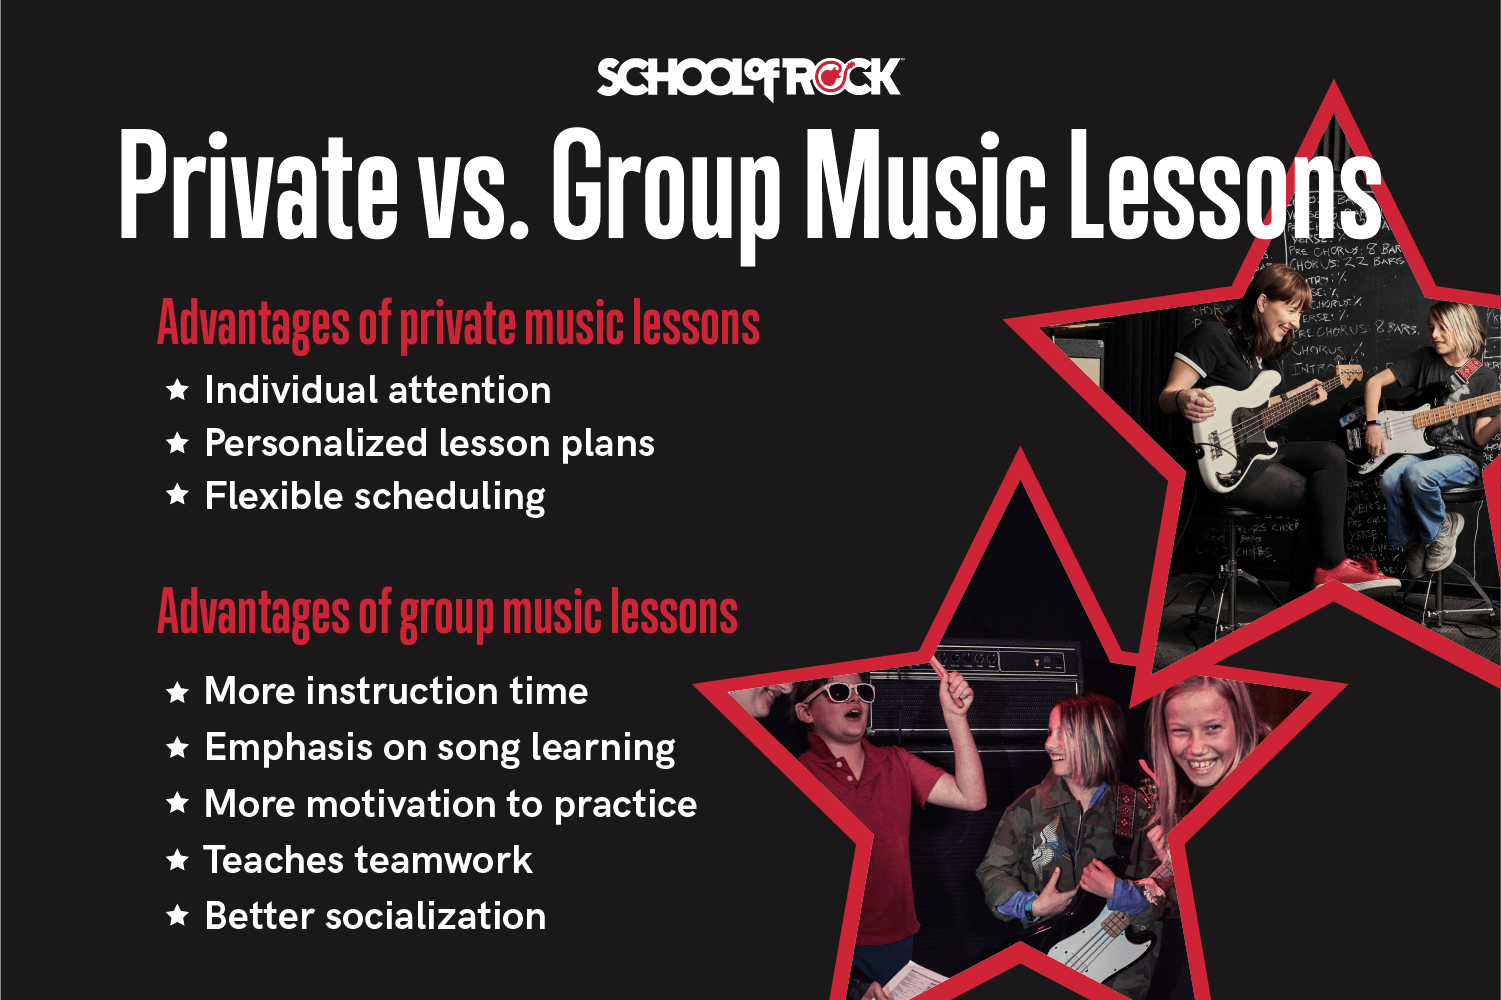 The advantages and disadvantages of private versus group music lessons.